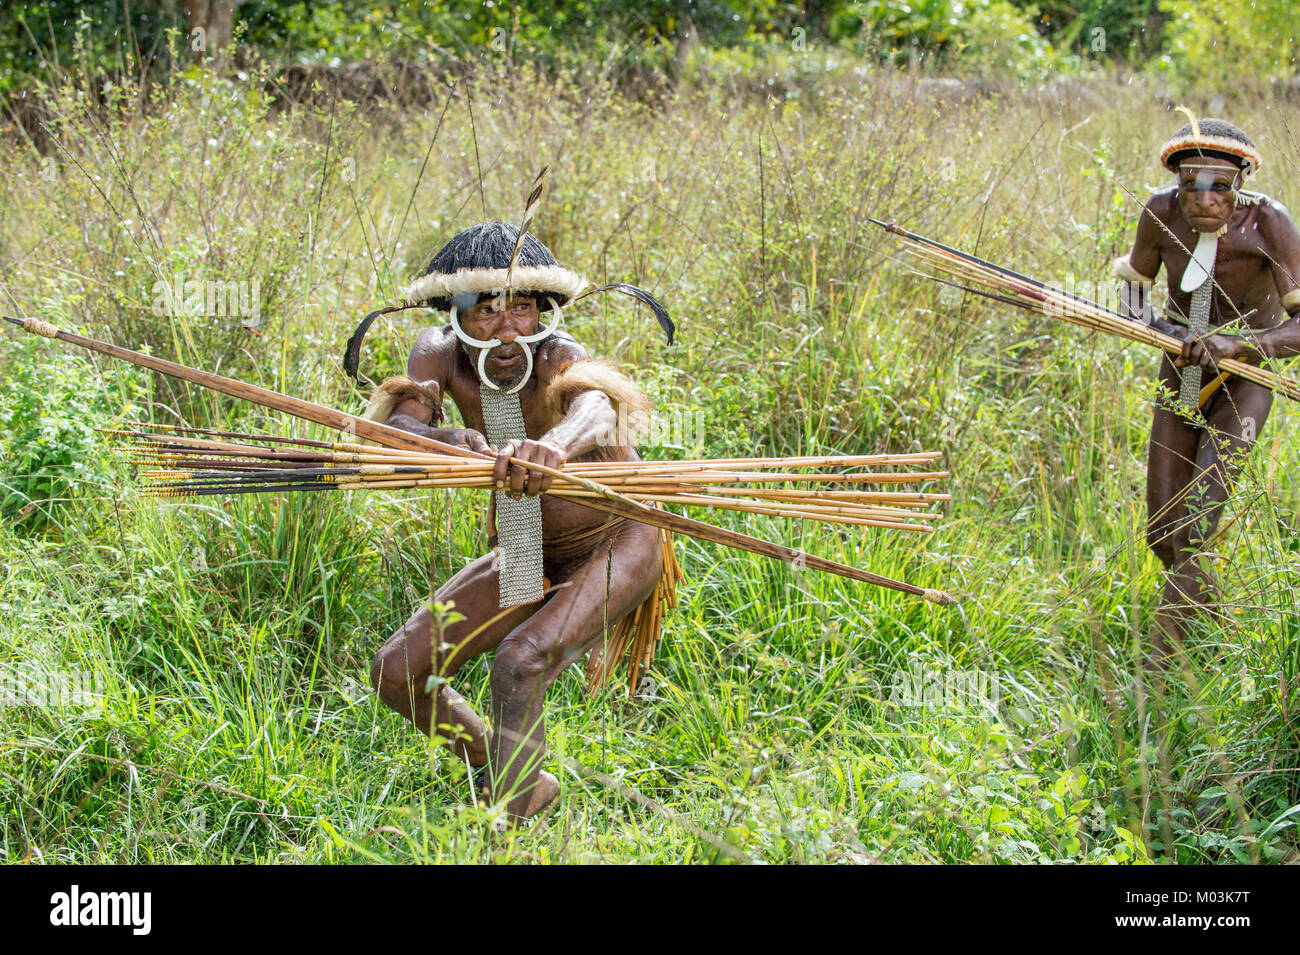 The attack of the armed group of Papuans. Attacking Group Warriors of Dani tribe. Stock Photo